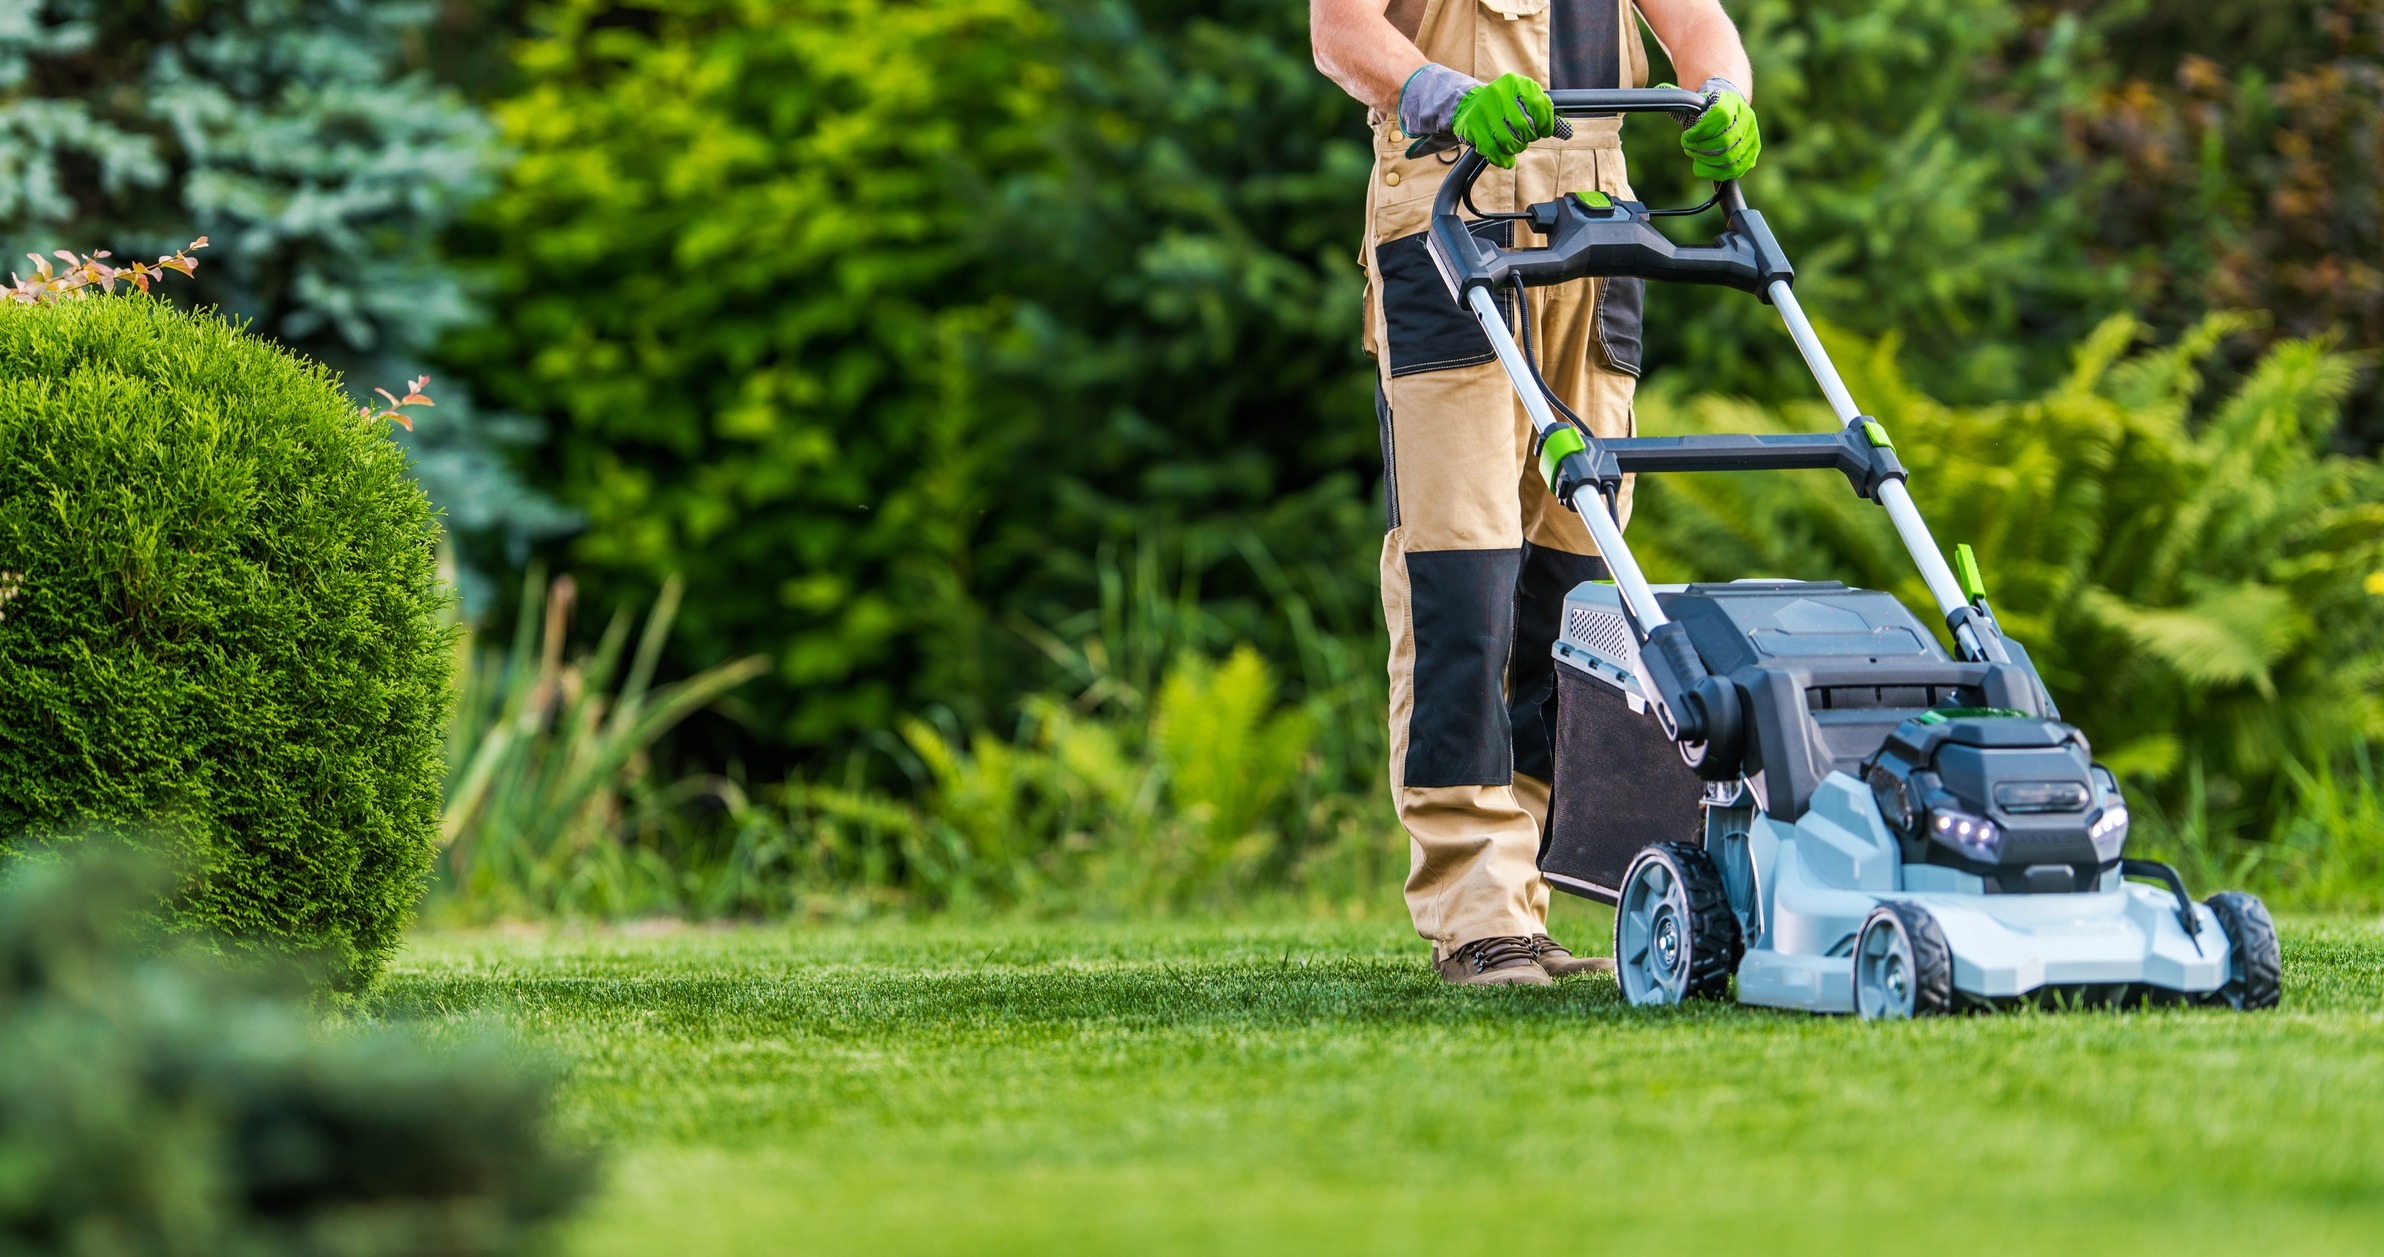 Professional-Caucasian-Gardener-in-His-40s-Trimming-Grass-Lawn-Using-Modern-Electric-Cordless-Mower.-Landscaping-Industry-Theme